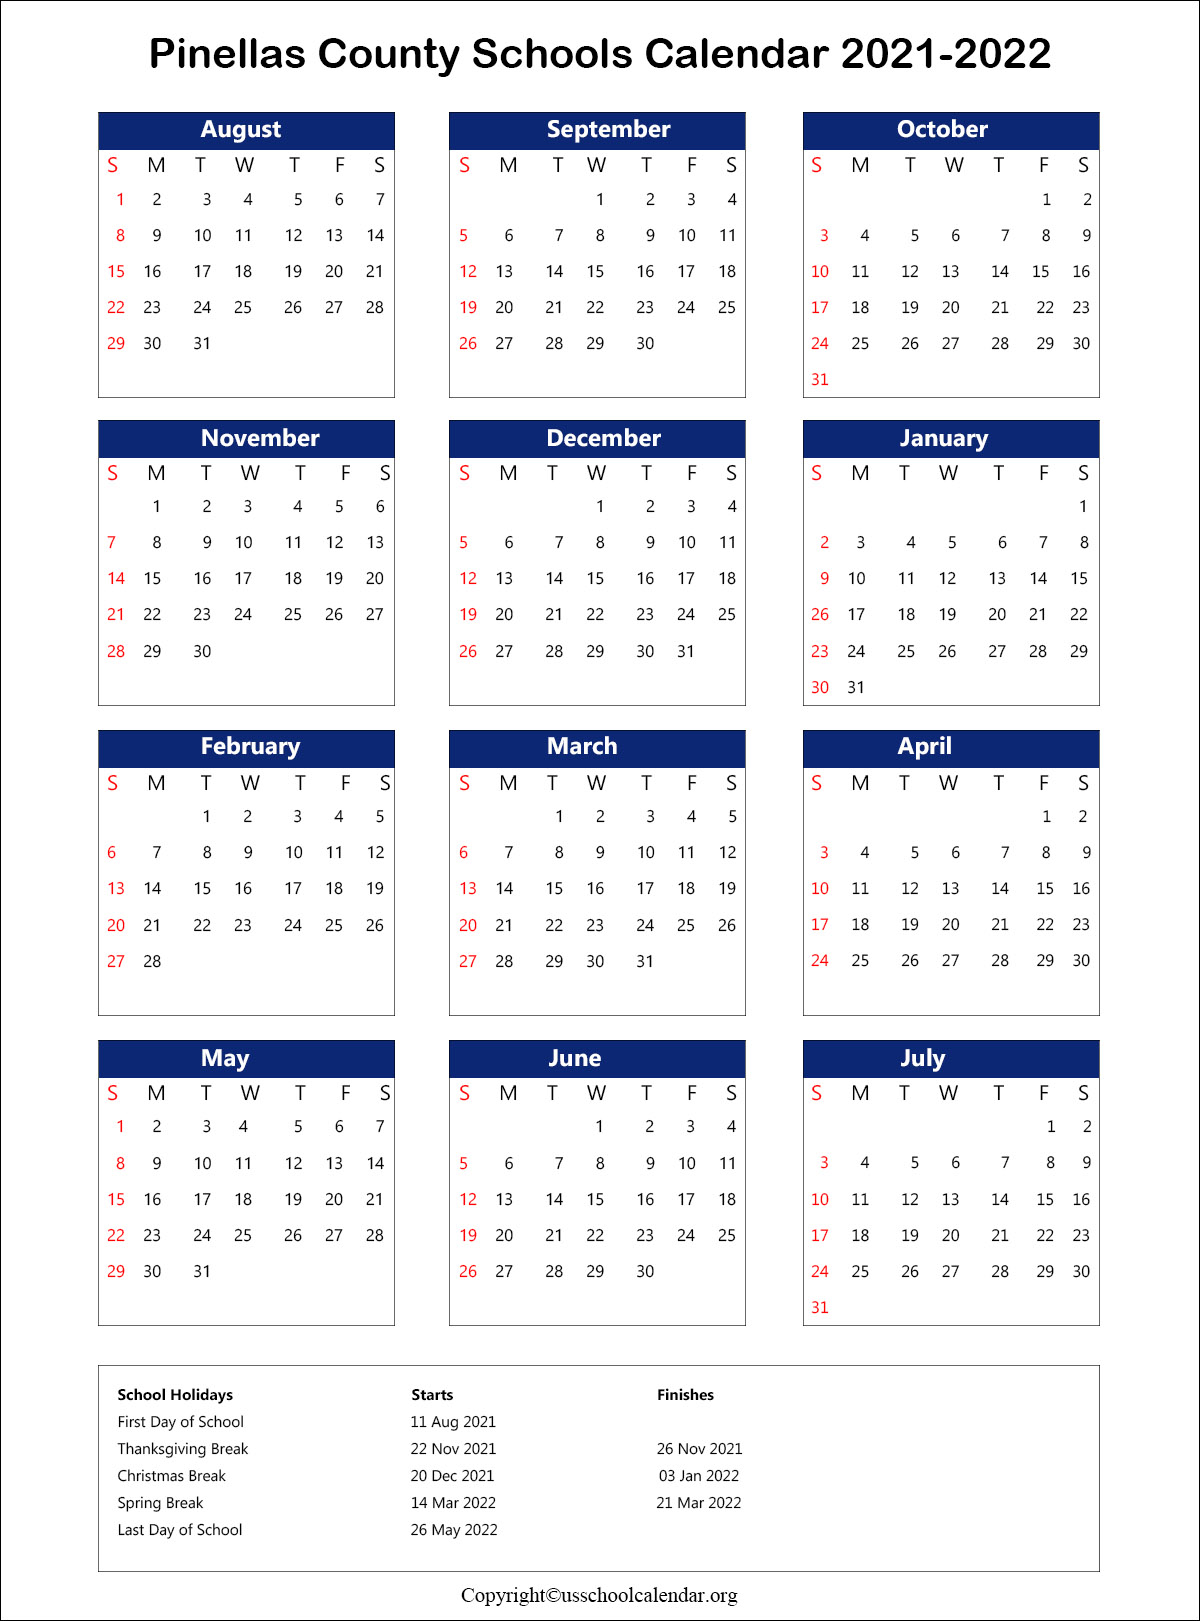 Pinellas County School Calendar with Holidays 20212022